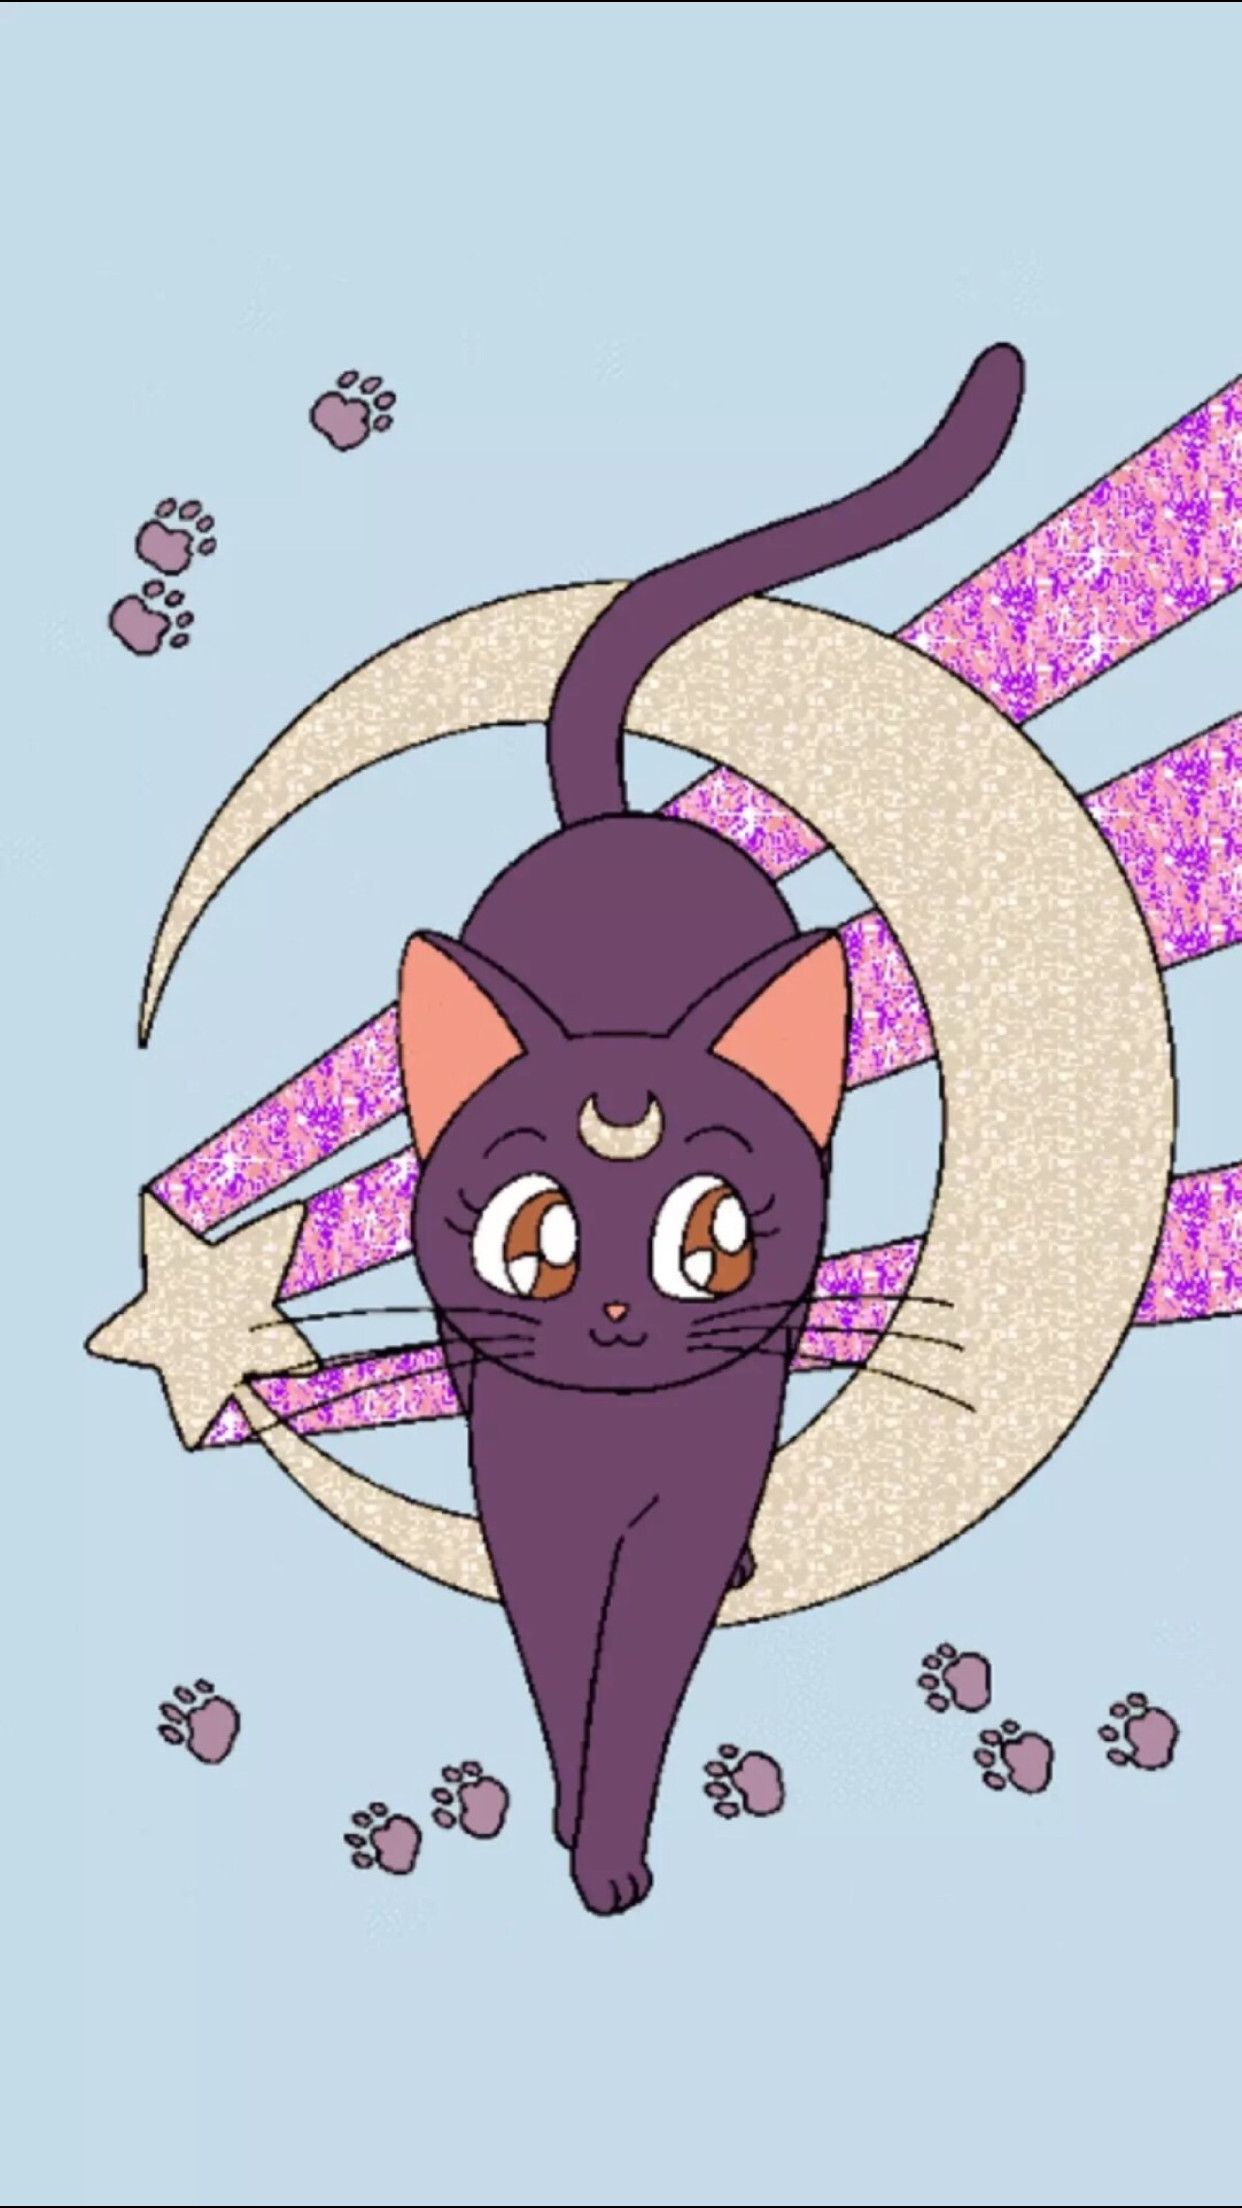 Sailor Moon With Luna Wallpapers Wallpaper Cave Sailor moon luna y artemis pictures. sailor moon with luna wallpapers